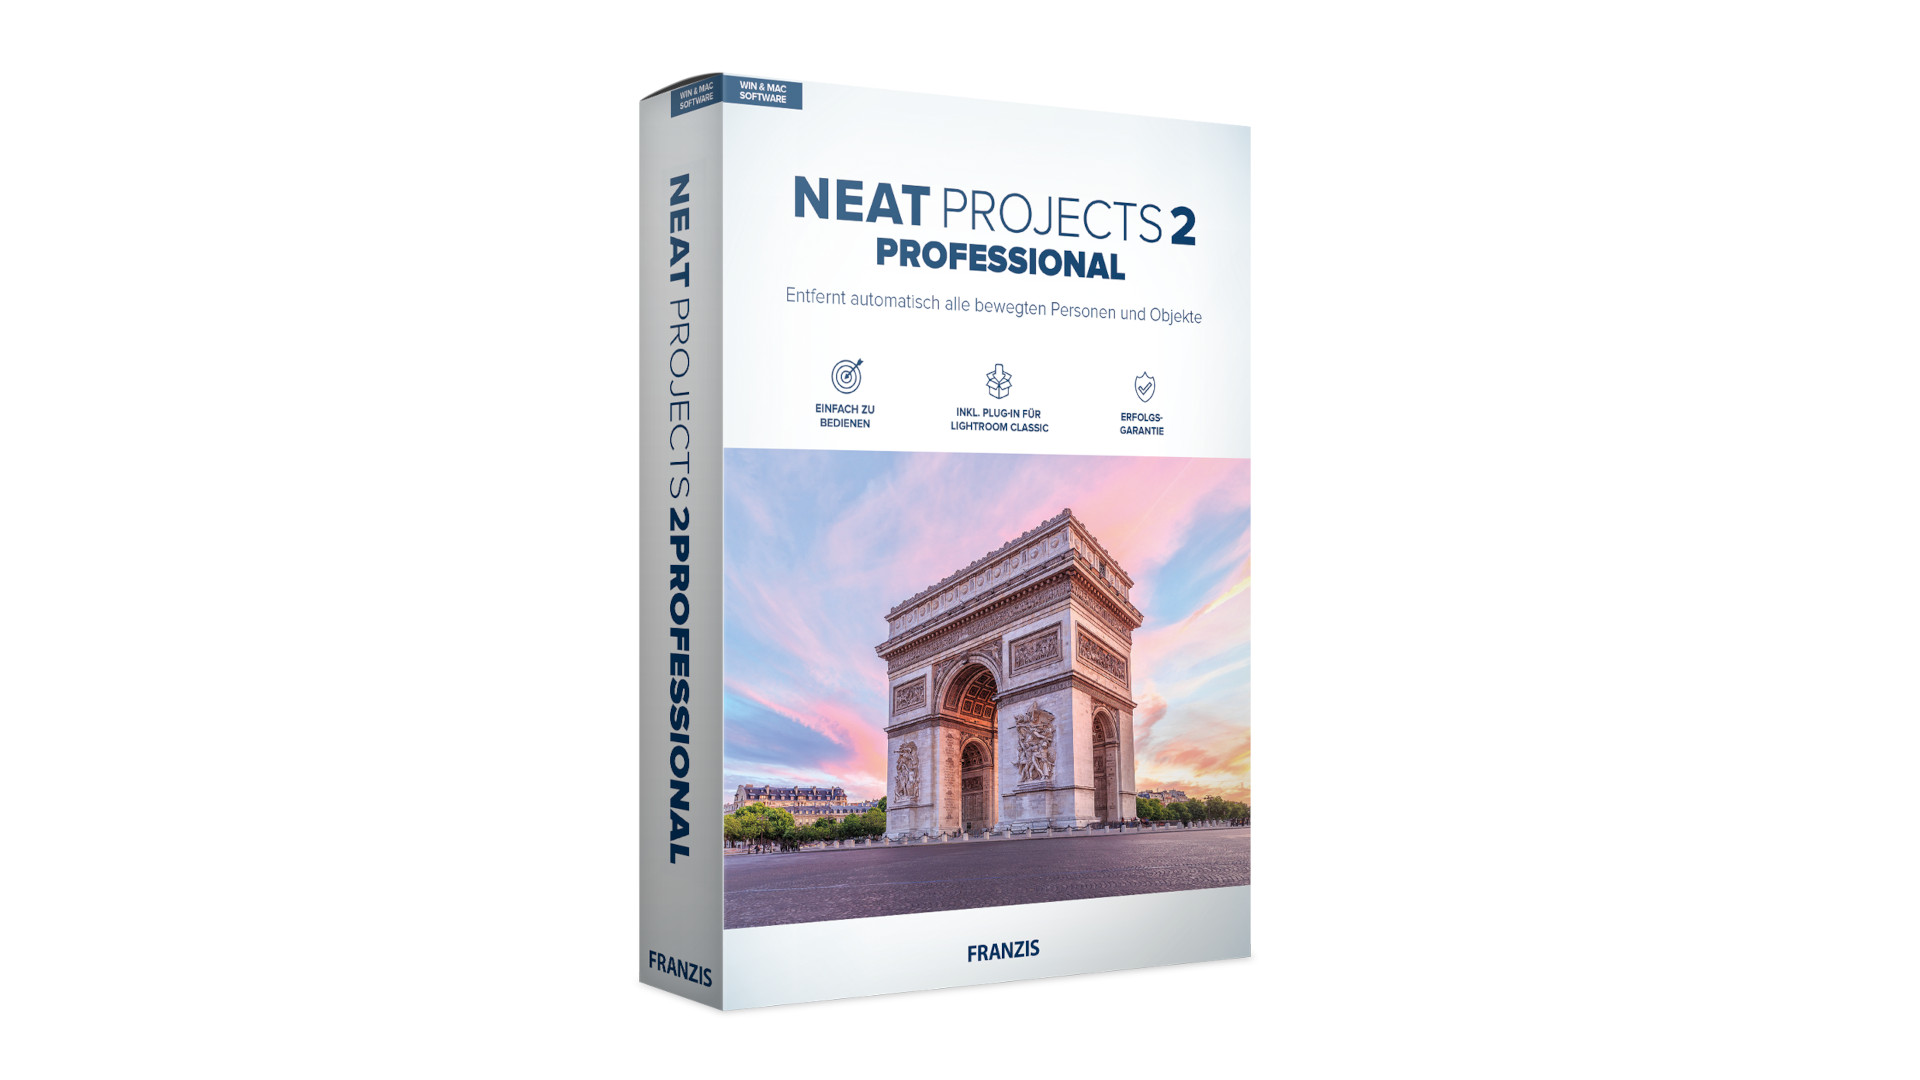 NEAT projects 2 Pro - Project Software Key (Lifetime / 1 PC) 33.89$